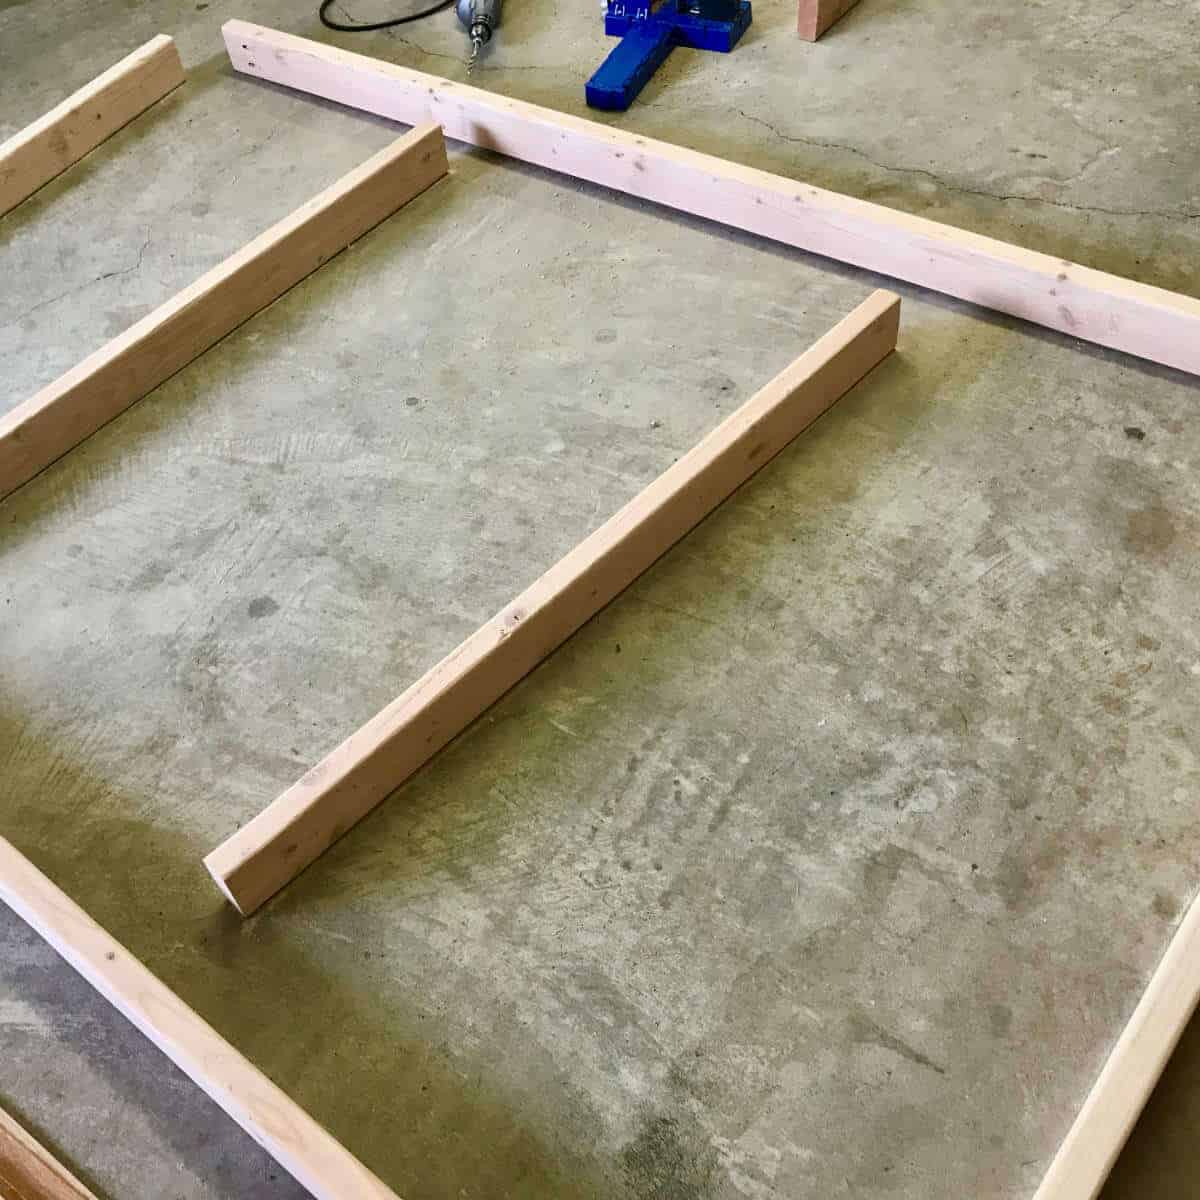 Framing boards laid out on a concrete garage floor for a backdrop wall.